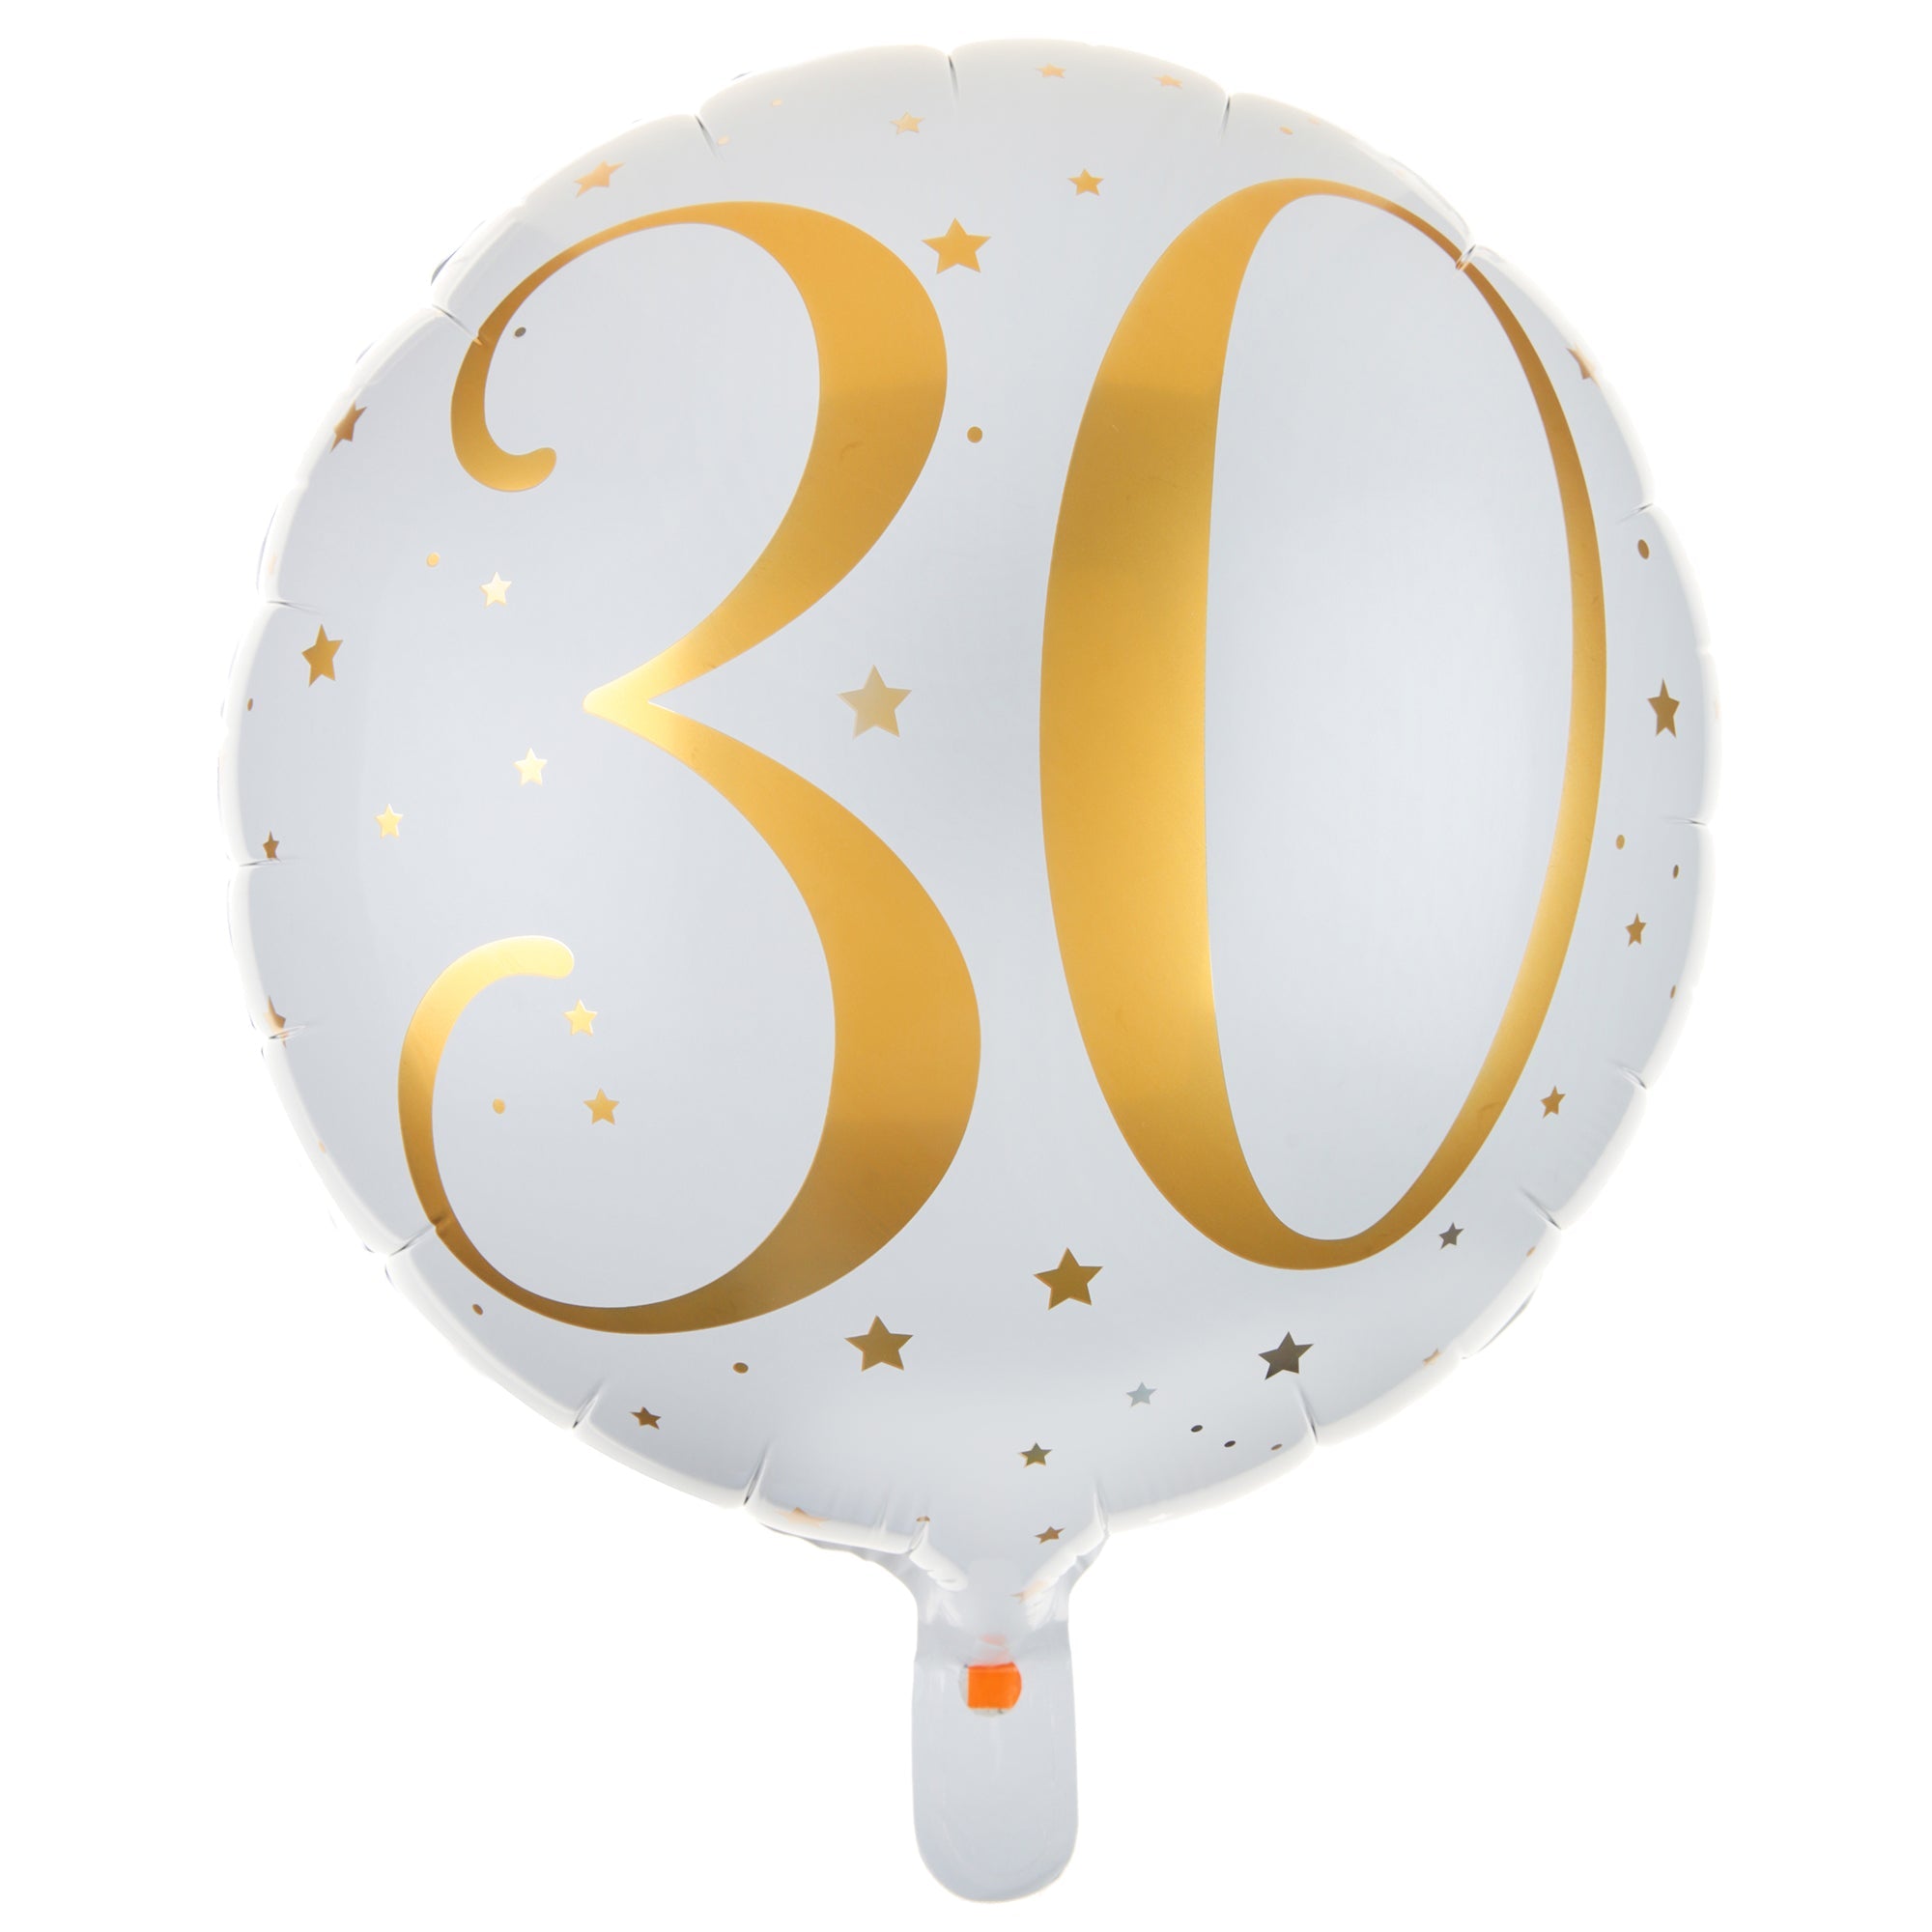 Age 30 Foil Balloon White and Gold 18in